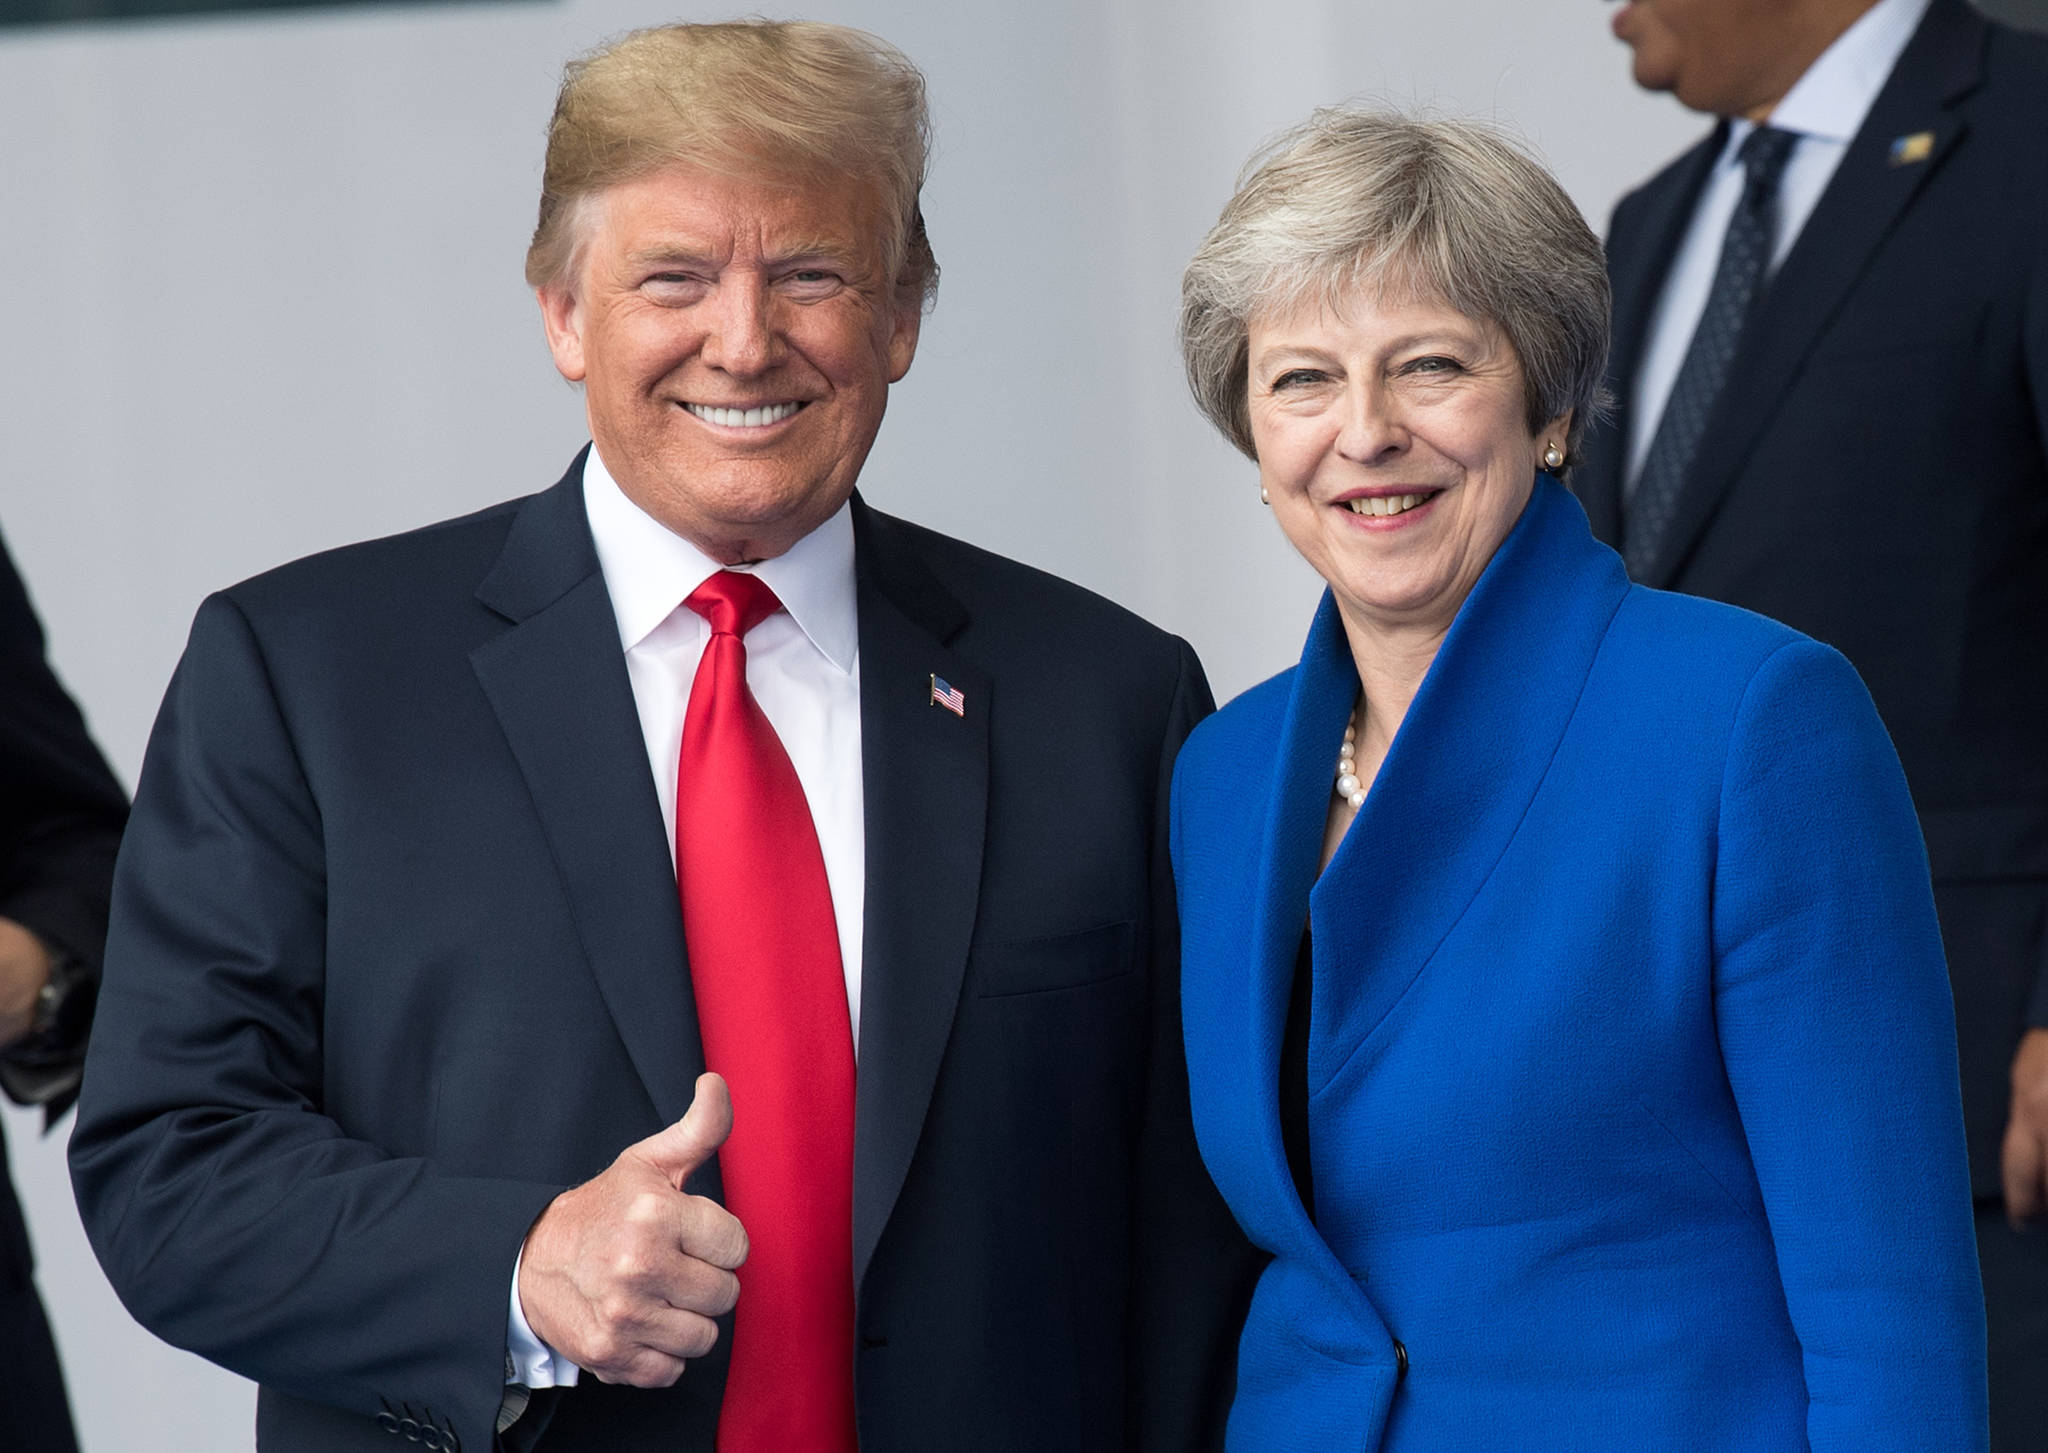 Theresa May, right,, Prime Minister of the United Kingdom, and Donald Trump, President of the United States of America, stand next to each other during a photocall at the NATO Summit on July 11, 2018 in Brussels, Belgium. (Bernd von Jutrczenka/DPA/Abaca Press/TNS)